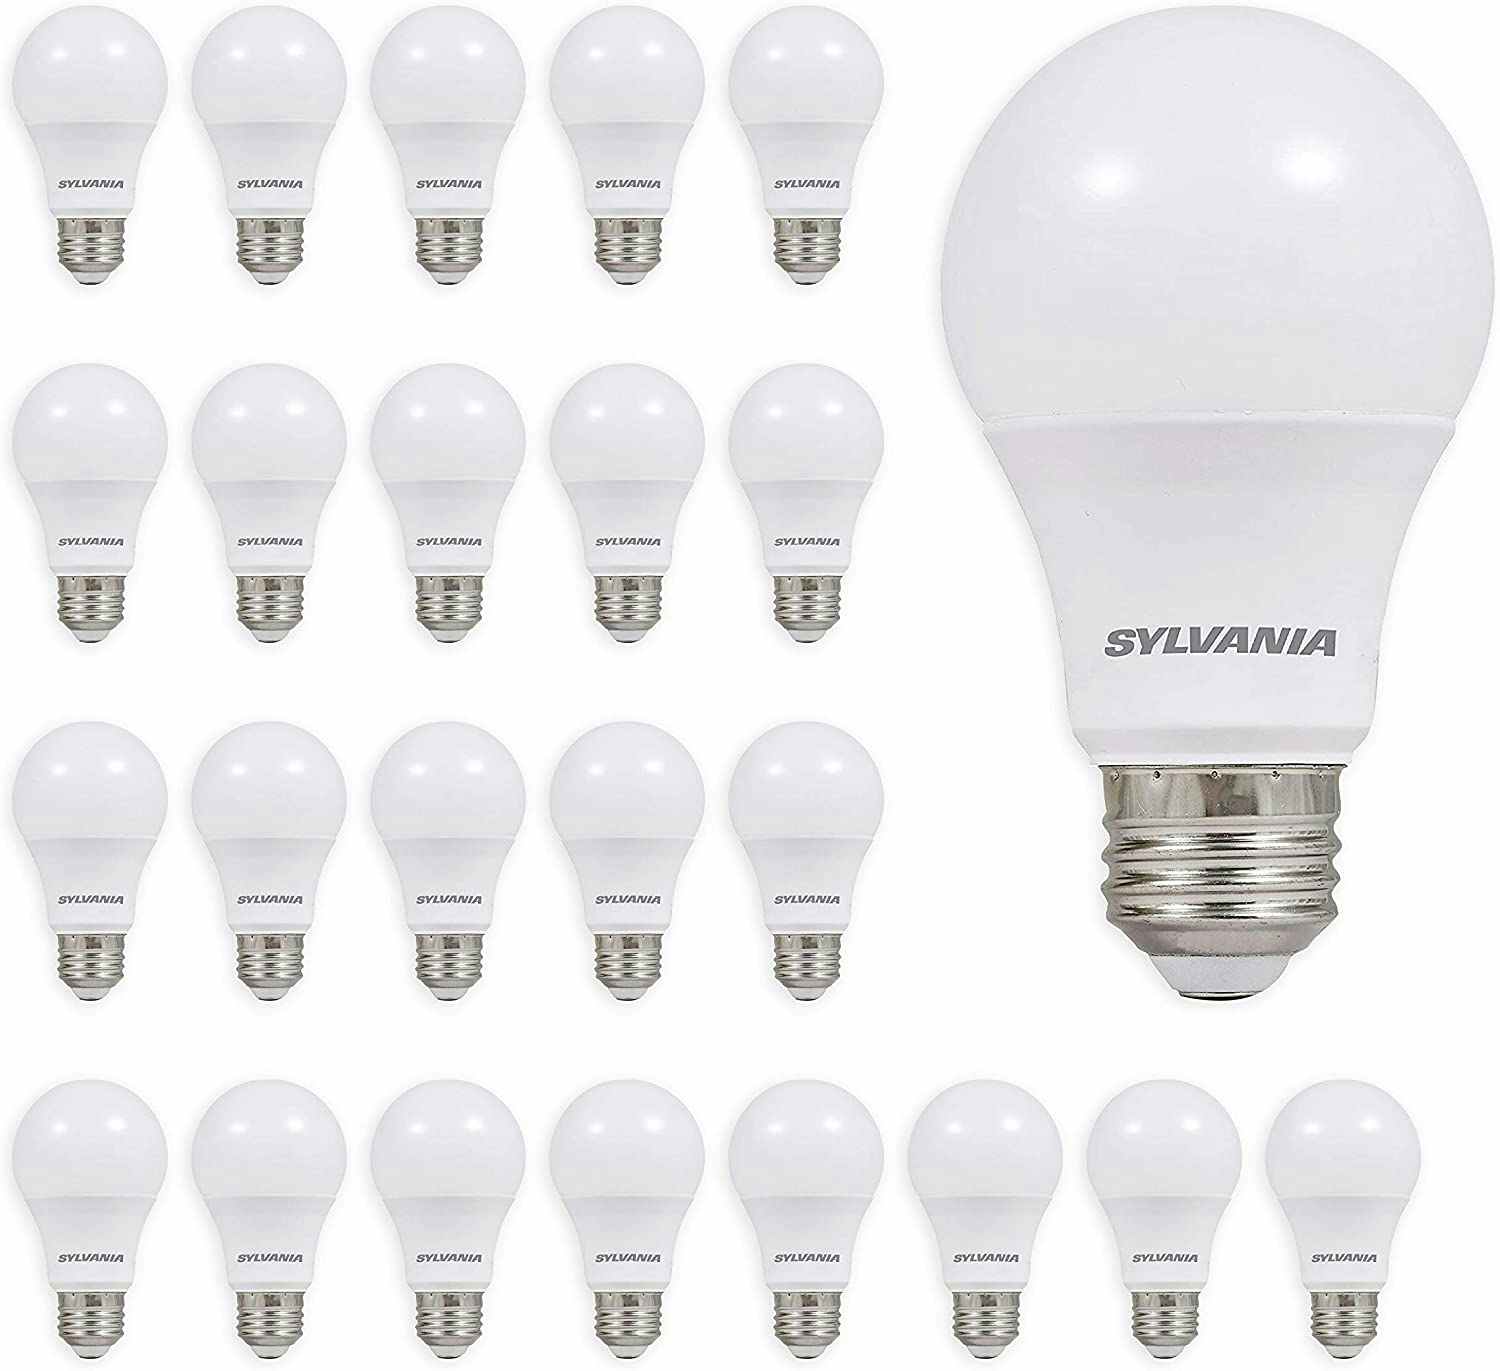 24 Sylvania light bulbs lined up in four rows